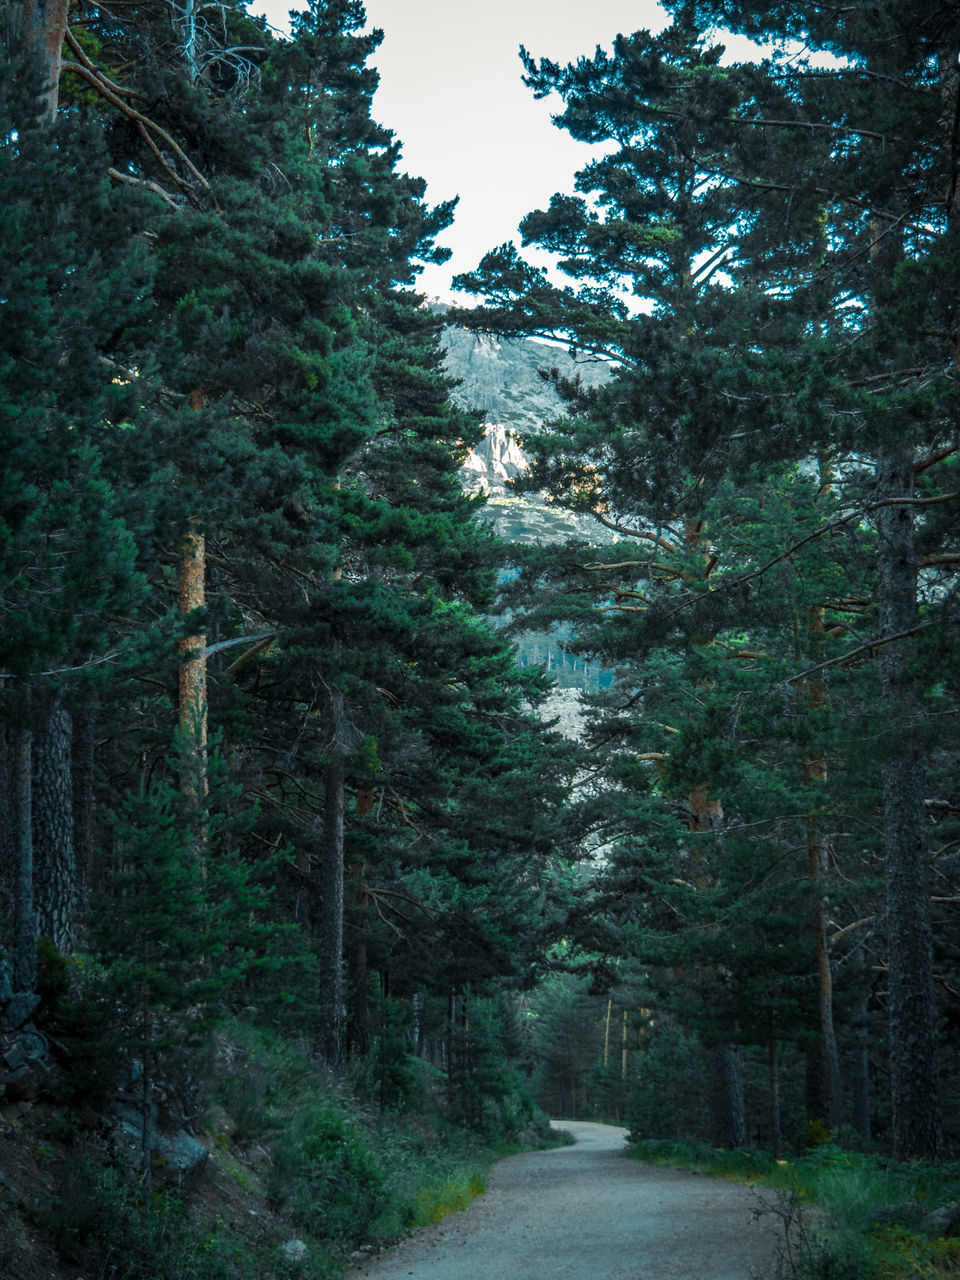 FOOTPATH AMIDST TREES IN FOREST